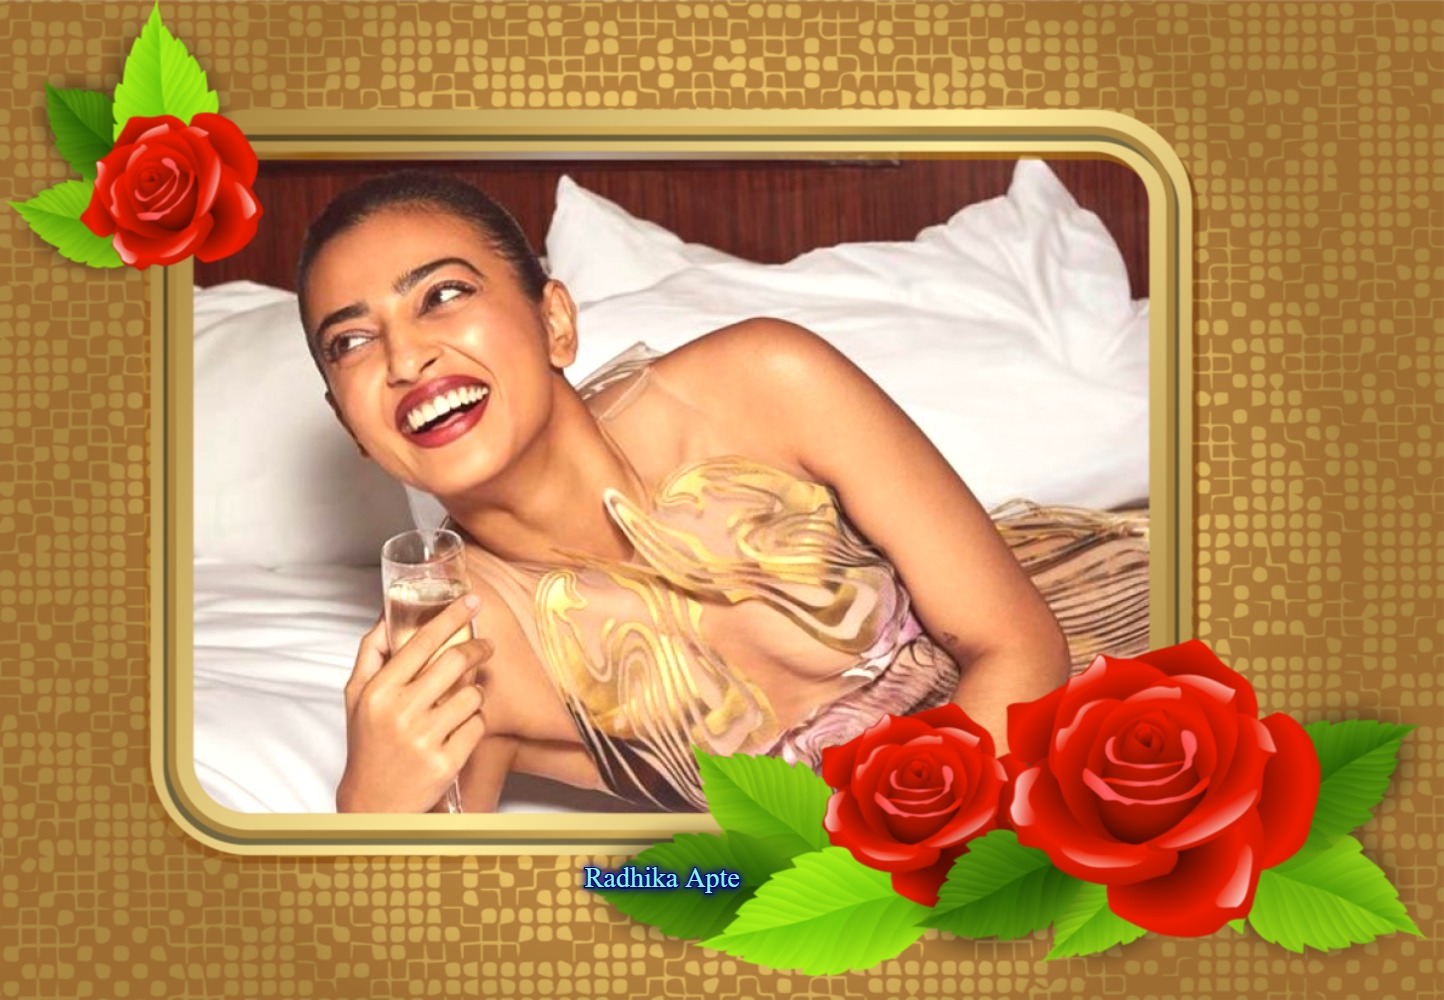 You are currently viewing “Elegance Personified Talented Actress-Radhika Apte”